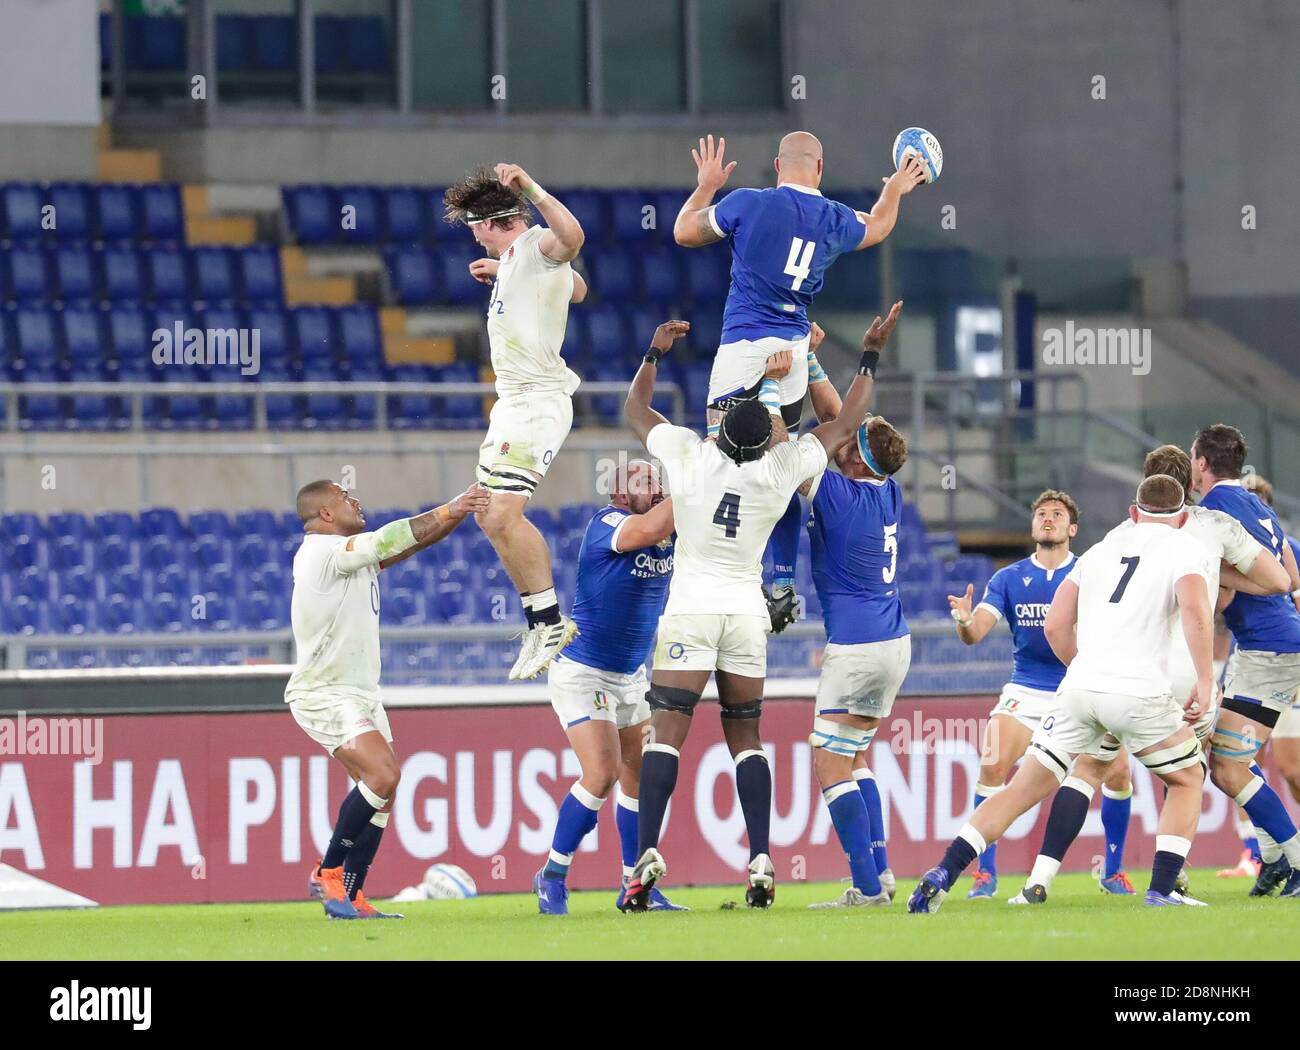 Rome, Italy. 31st Oct, 2020. rome, Italy, Stadio Olimpico, 31 Oct 2020, touche Italy during Italy vs England - Rugby Six Nations match - Credit: LM/Luigi Mariani Credit: Luigi Mariani/LPS/ZUMA Wire/Alamy Live News Stock Photo